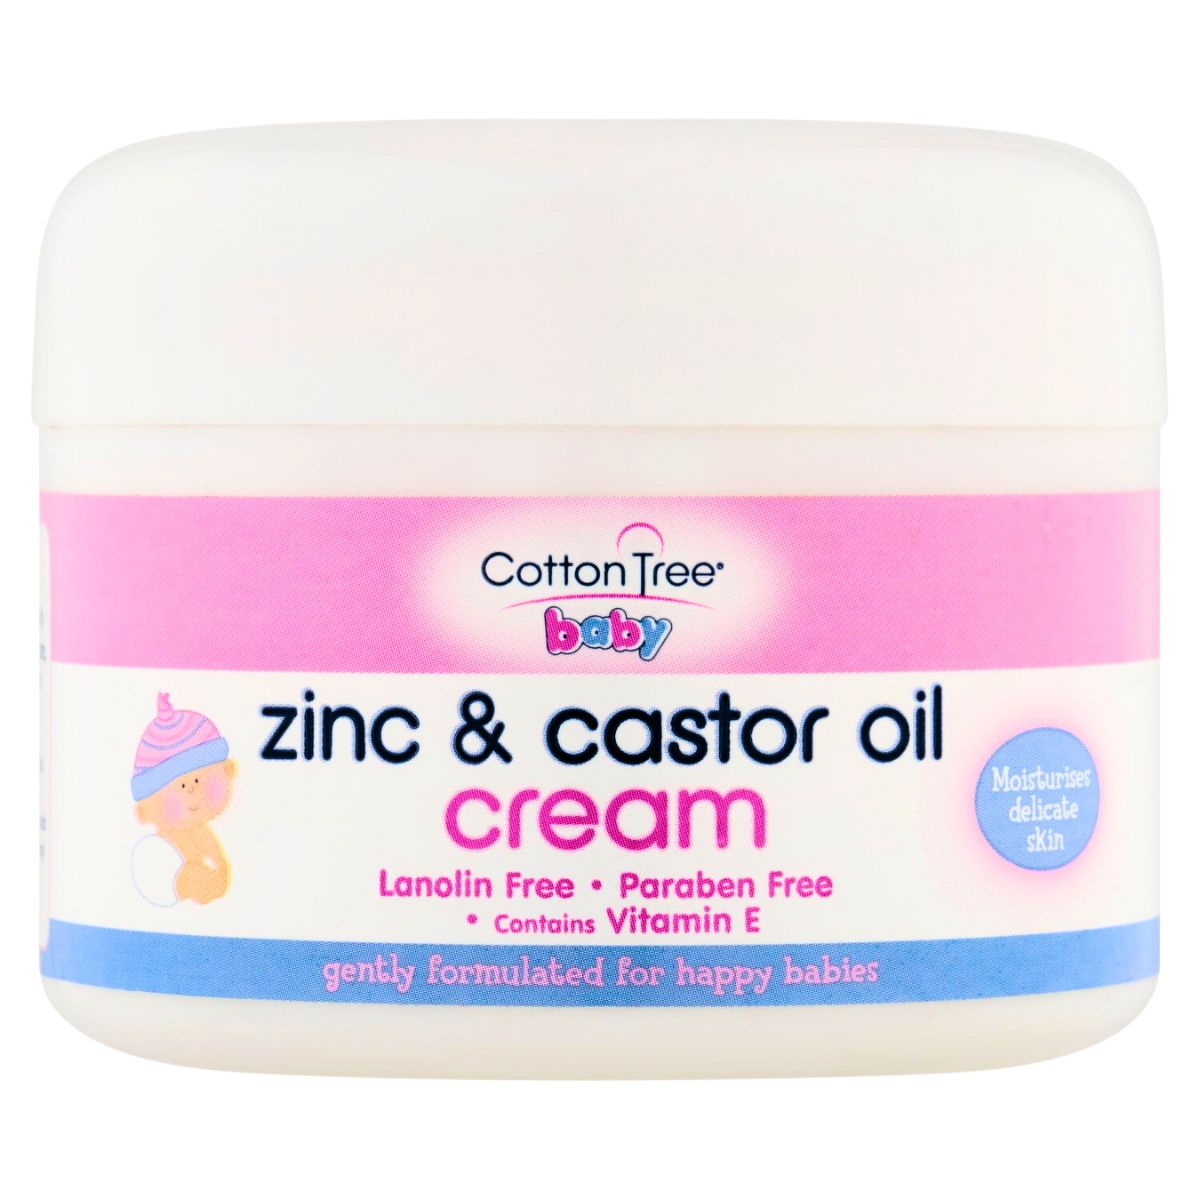 Jar of Cotton Tree - Zinc and Castor Oil Cream - 200ml, labeled as lanolin free, paraben free, and contains vitamin e, featuring a pink and blue design.